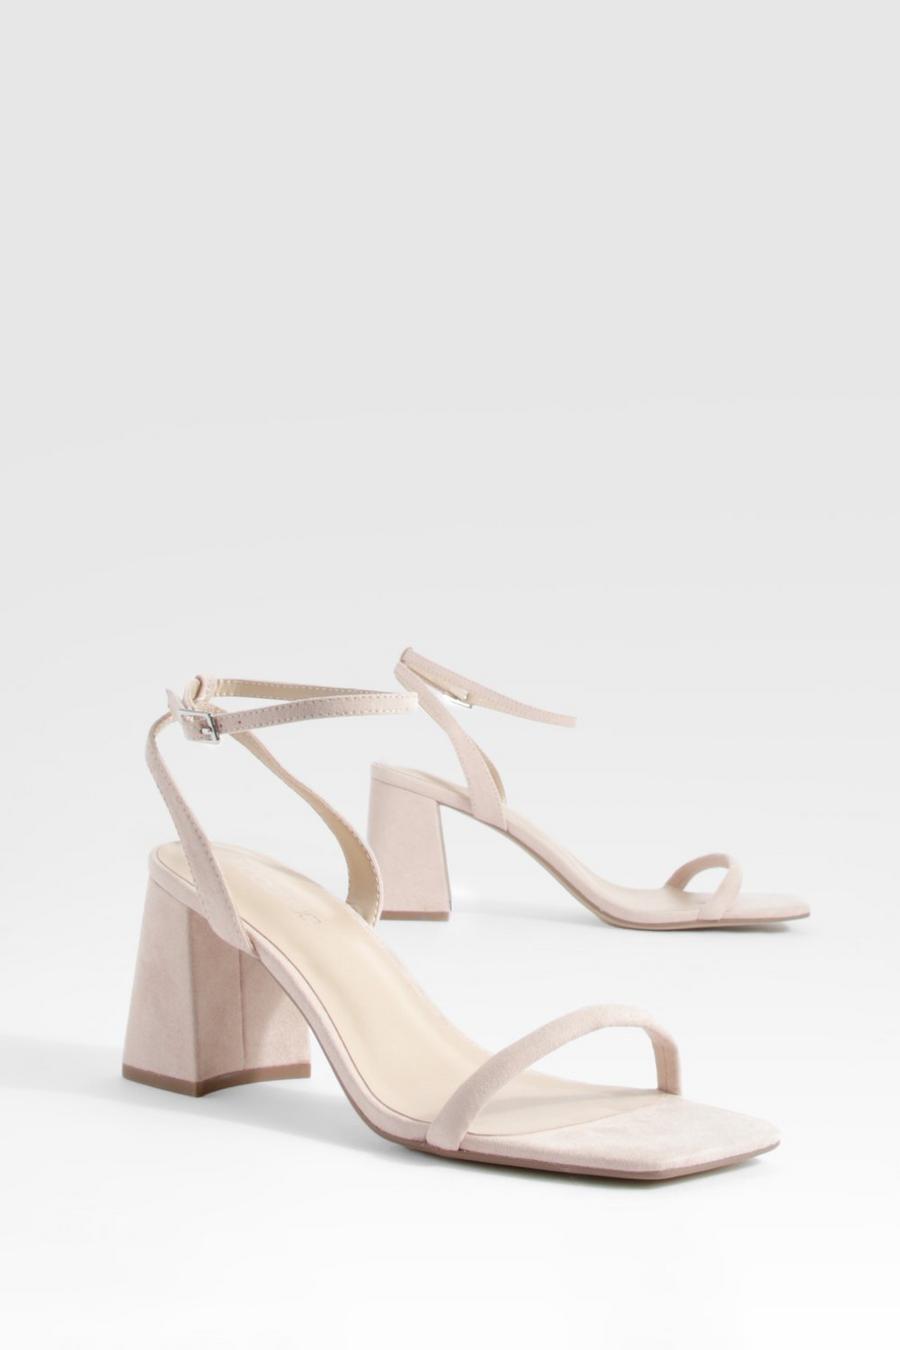 Strappy Sandals, Flat & Heeled Strappy Sandals